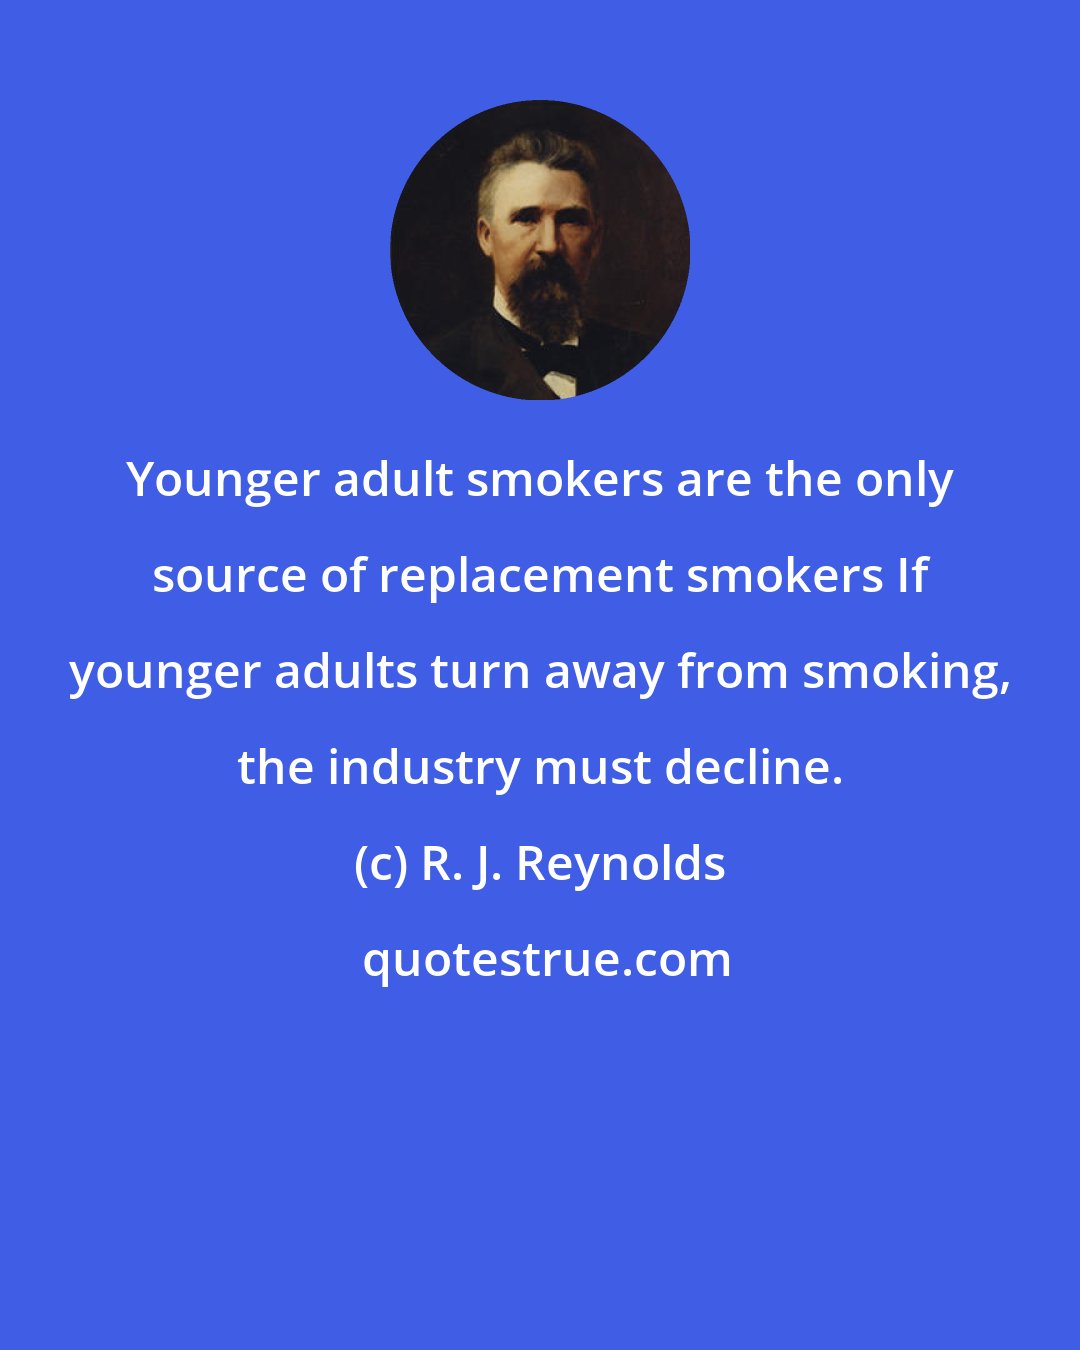 R. J. Reynolds: Younger adult smokers are the only source of replacement smokers If younger adults turn away from smoking, the industry must decline.